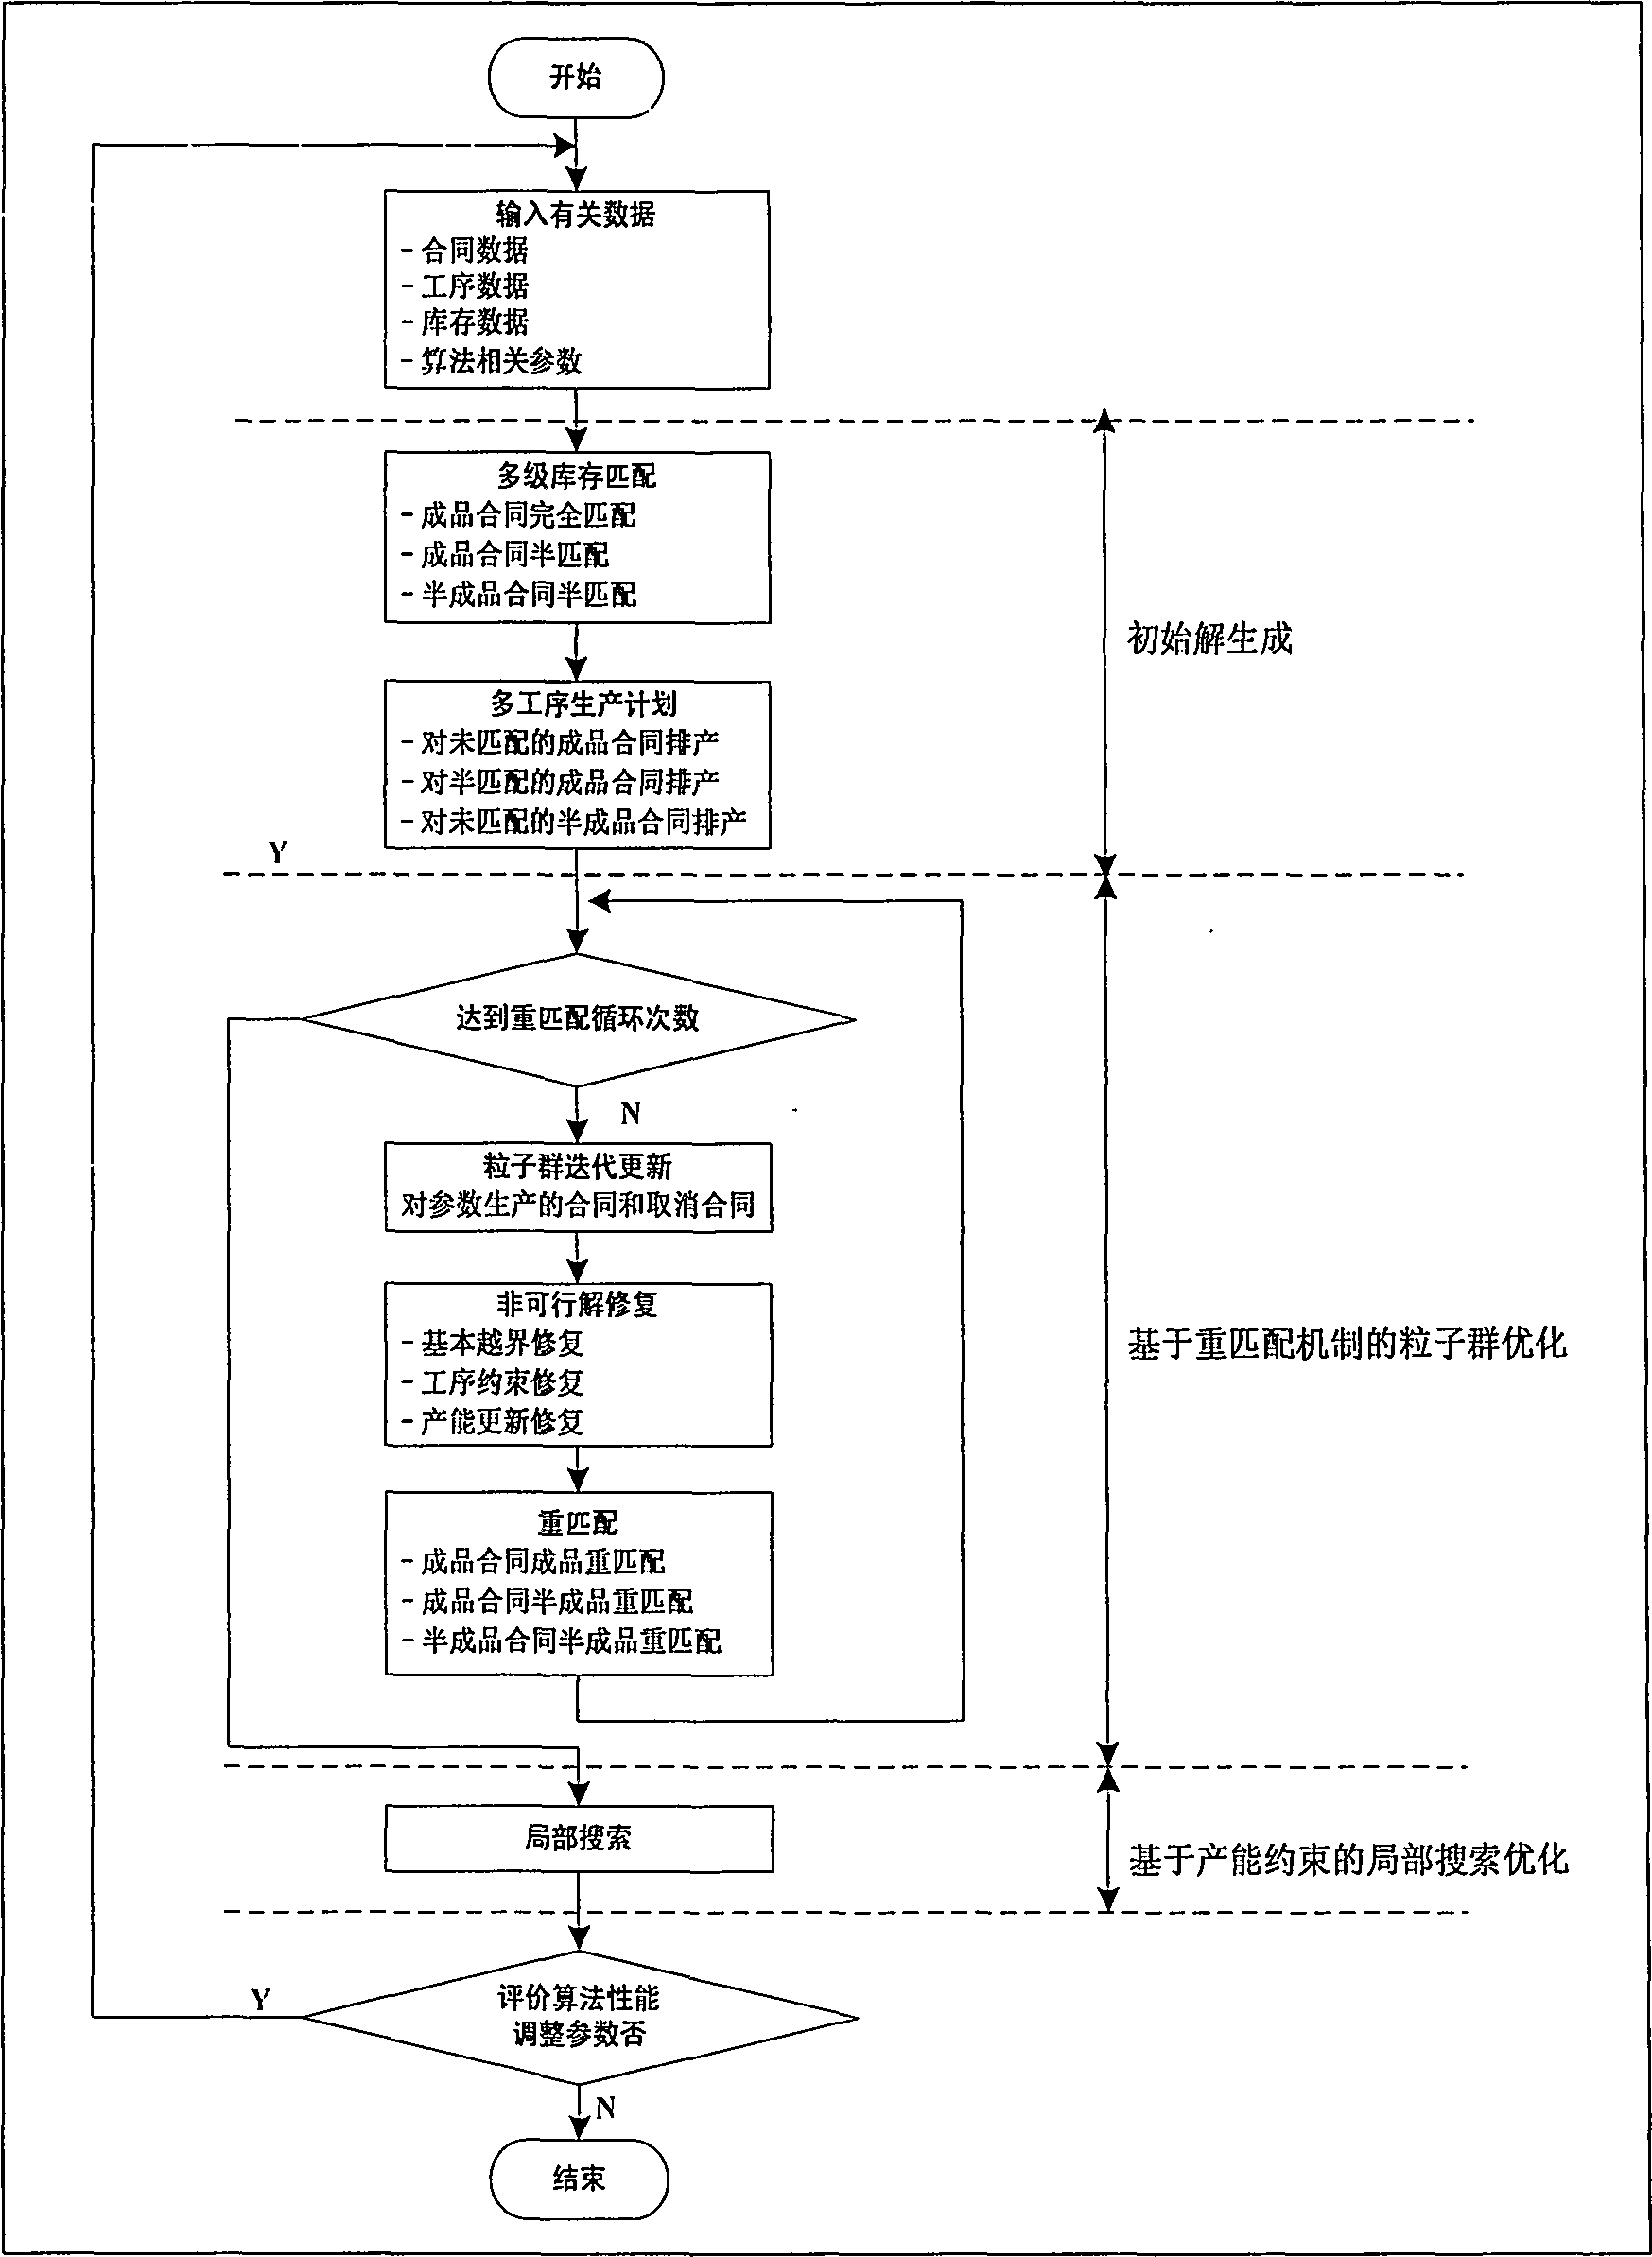 Method for steel production contract plan and multi-level inventory matching optimization under MTO-MTS management mode